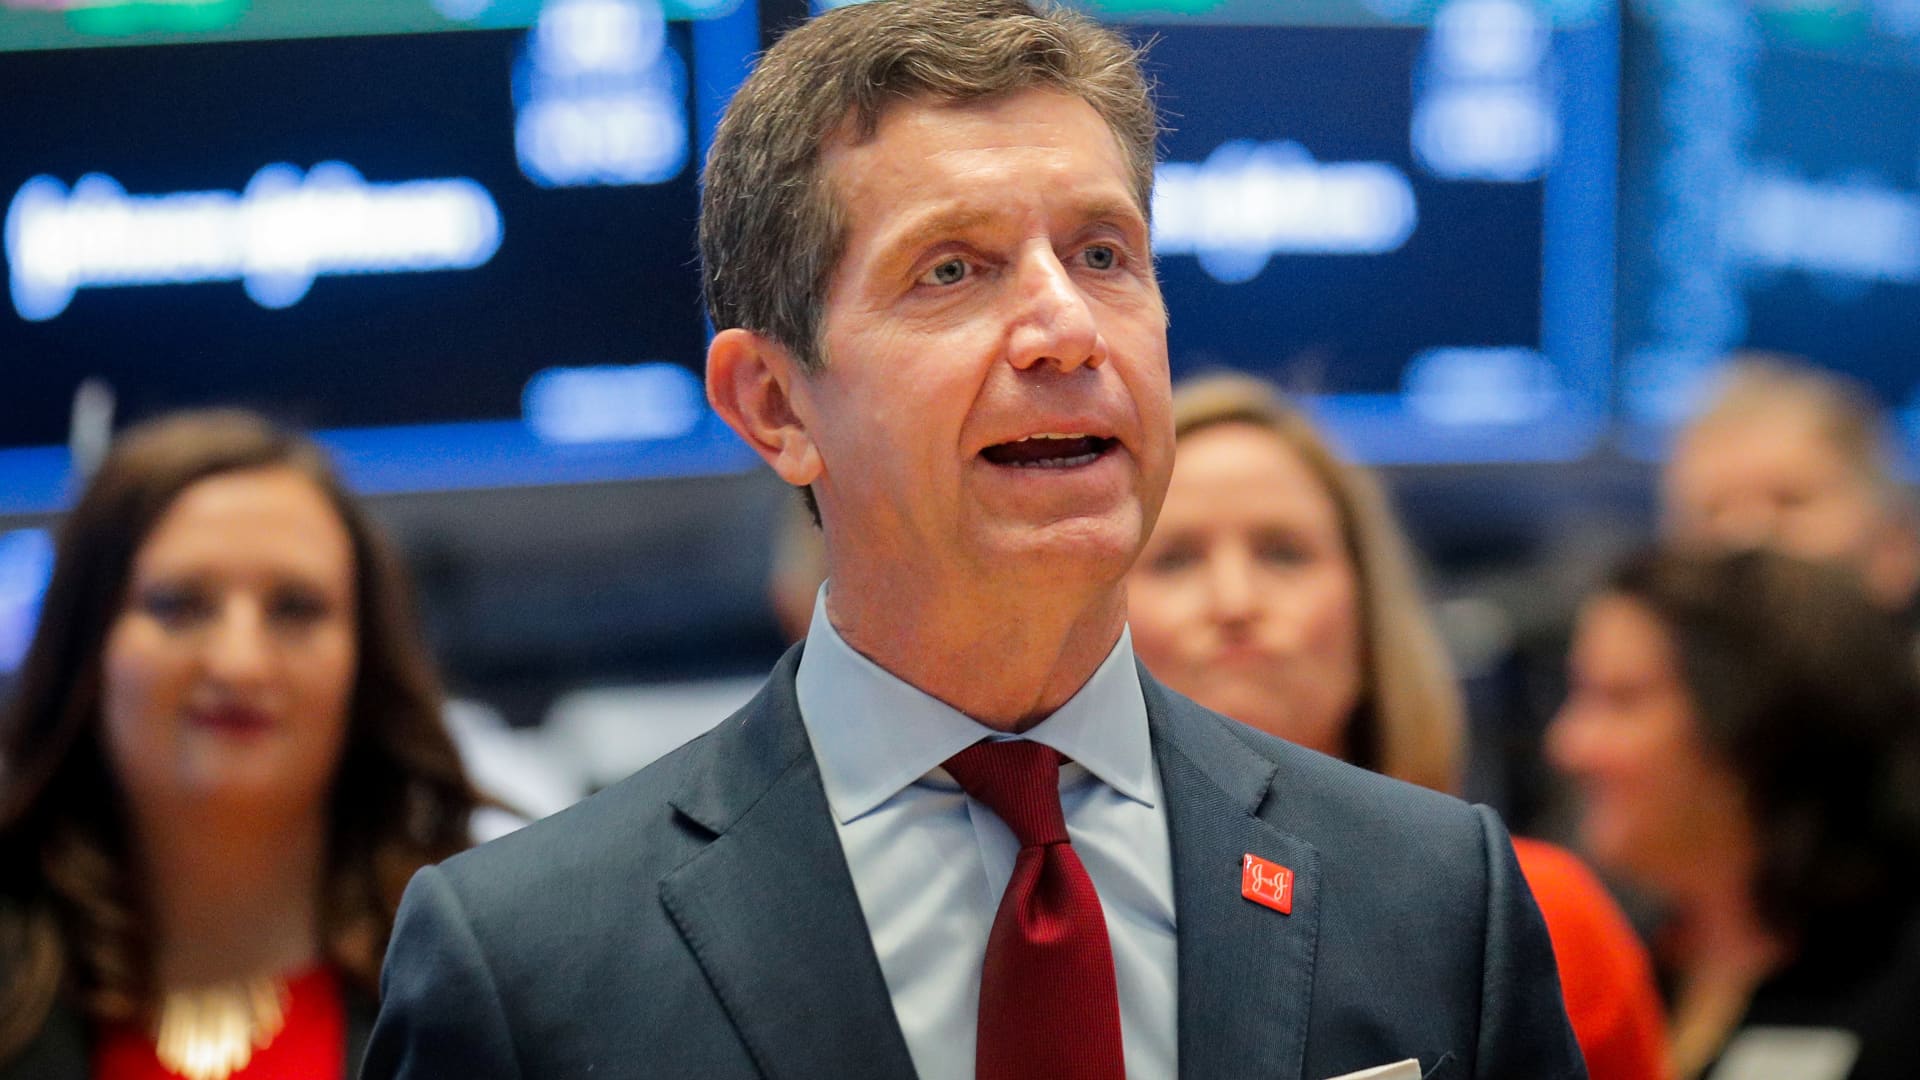 Alex Gorsky, Chairman and CEO of Johnson & Johnson, celebrates the 75th anniversary of his company's listing on the floor at the New York Stock Exchange, September 17, 2019.